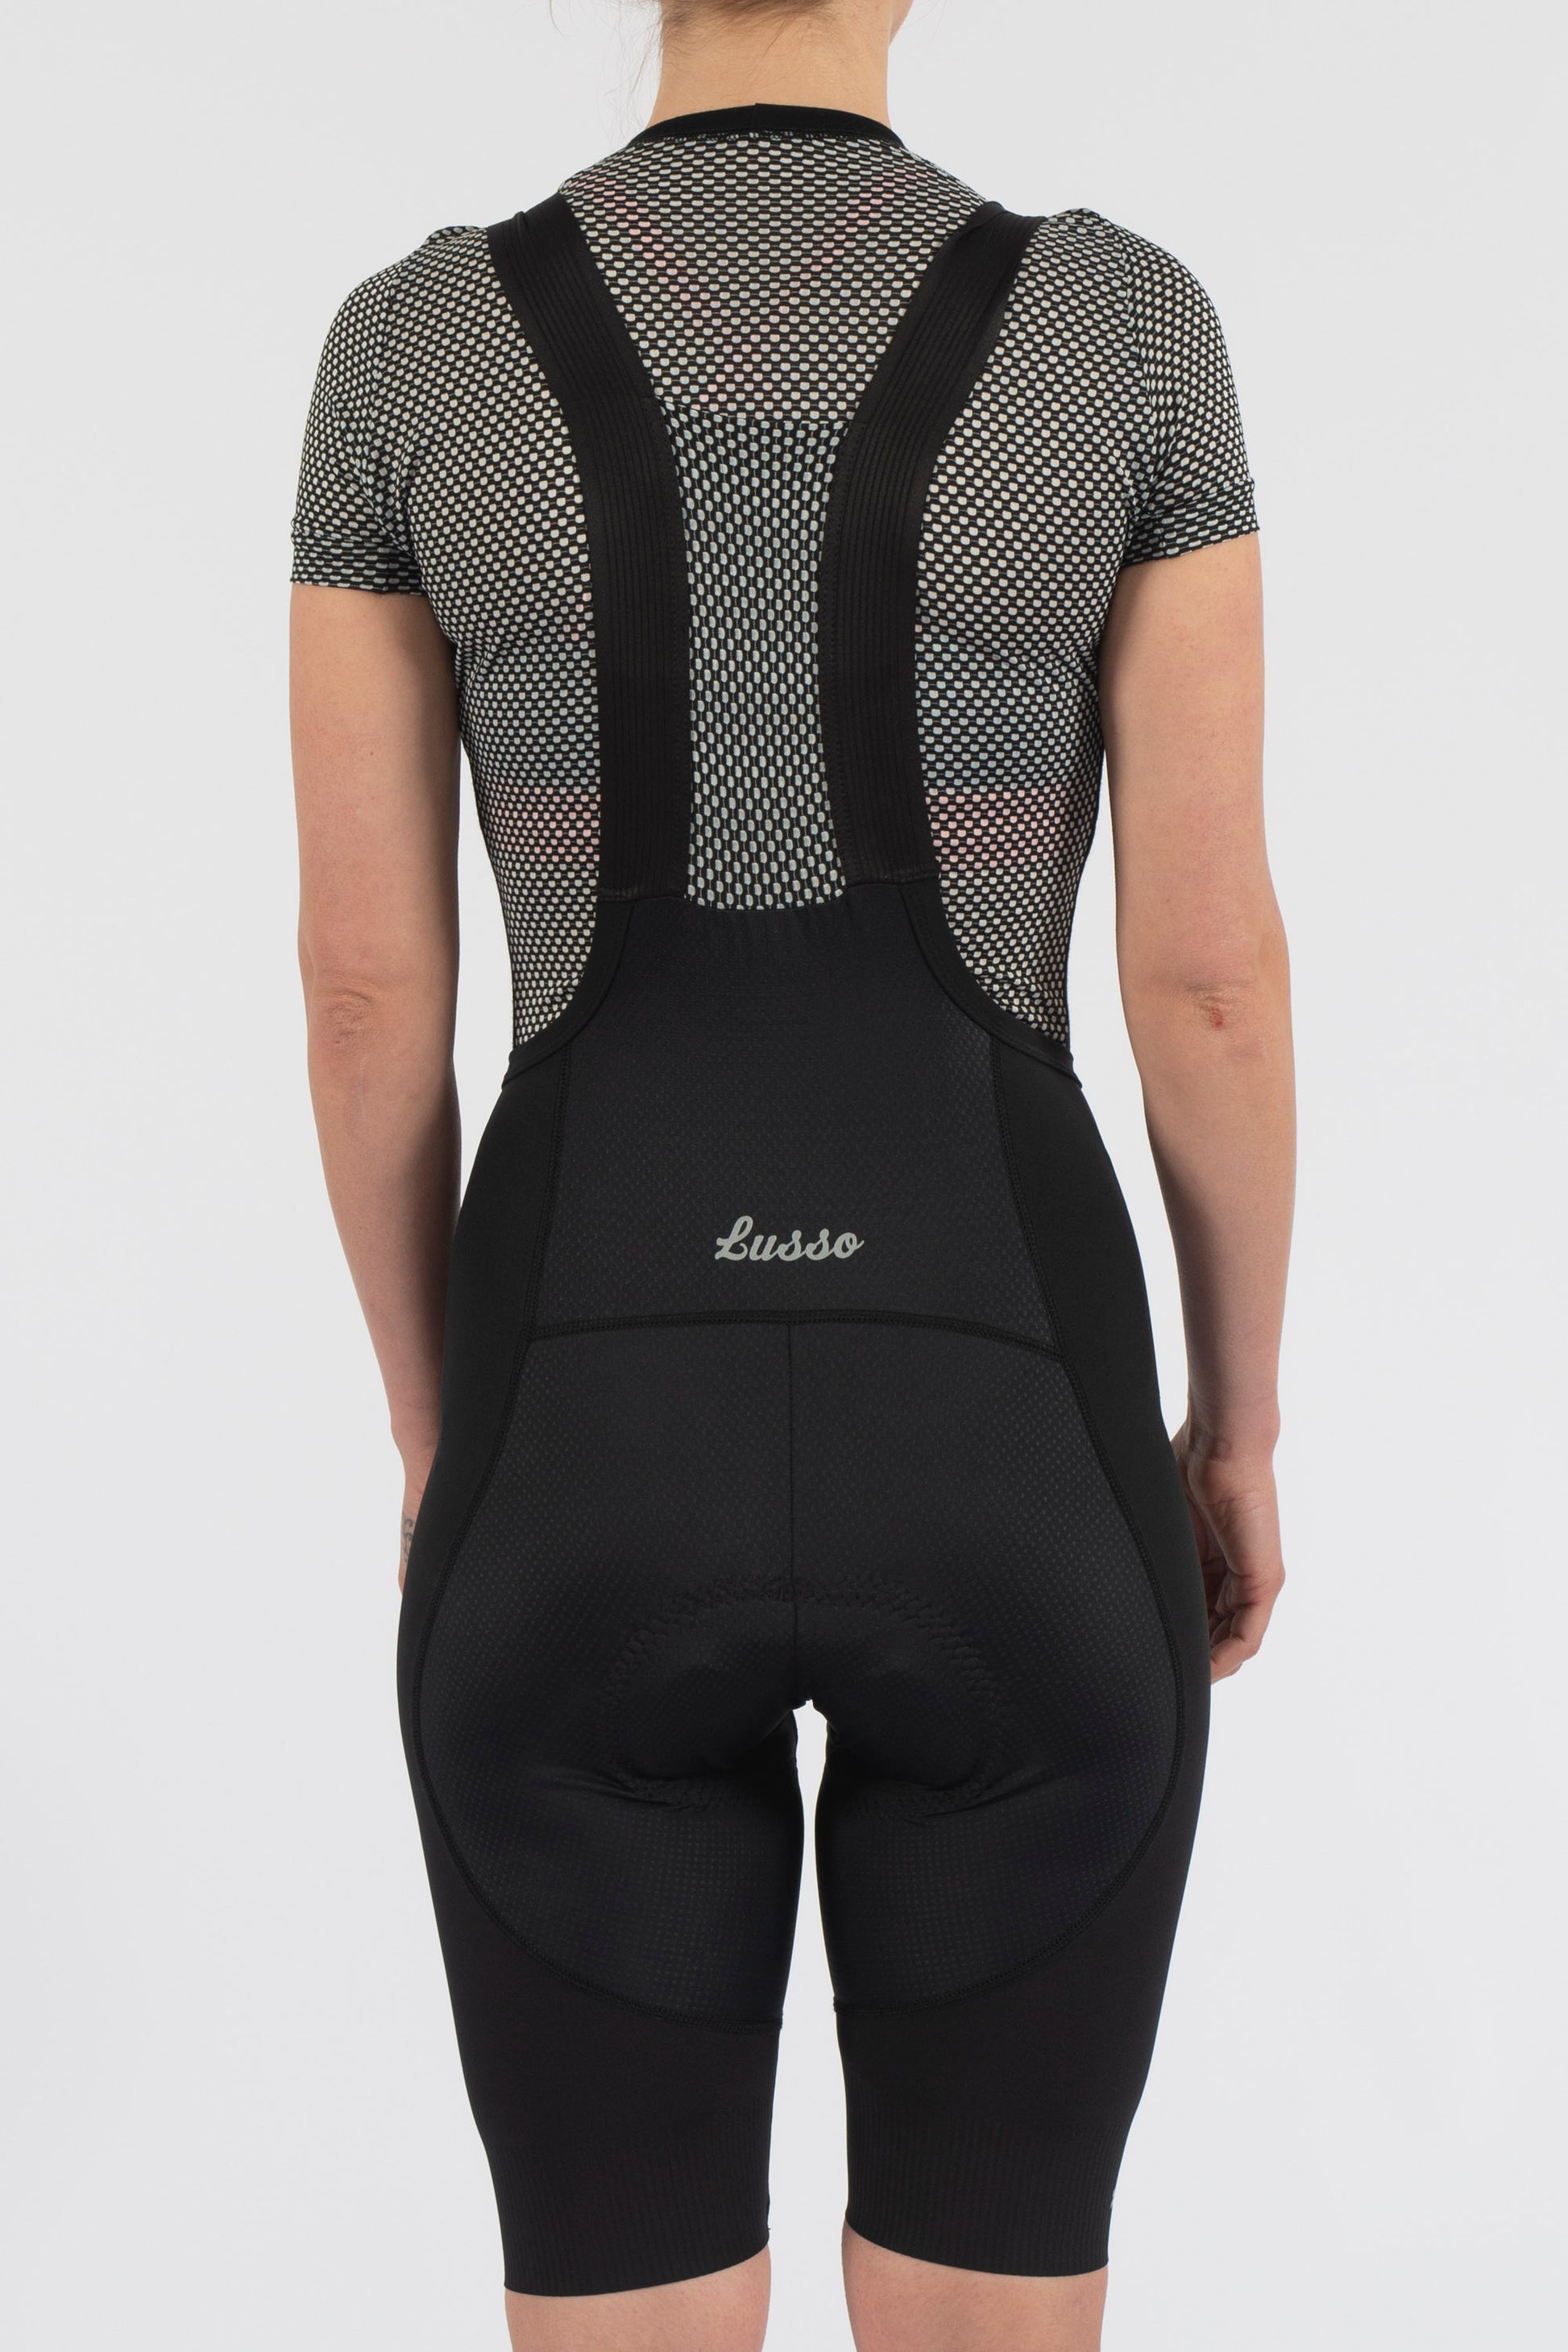 RS19 Bibshorts - Womens - Lusso Cycle Wear